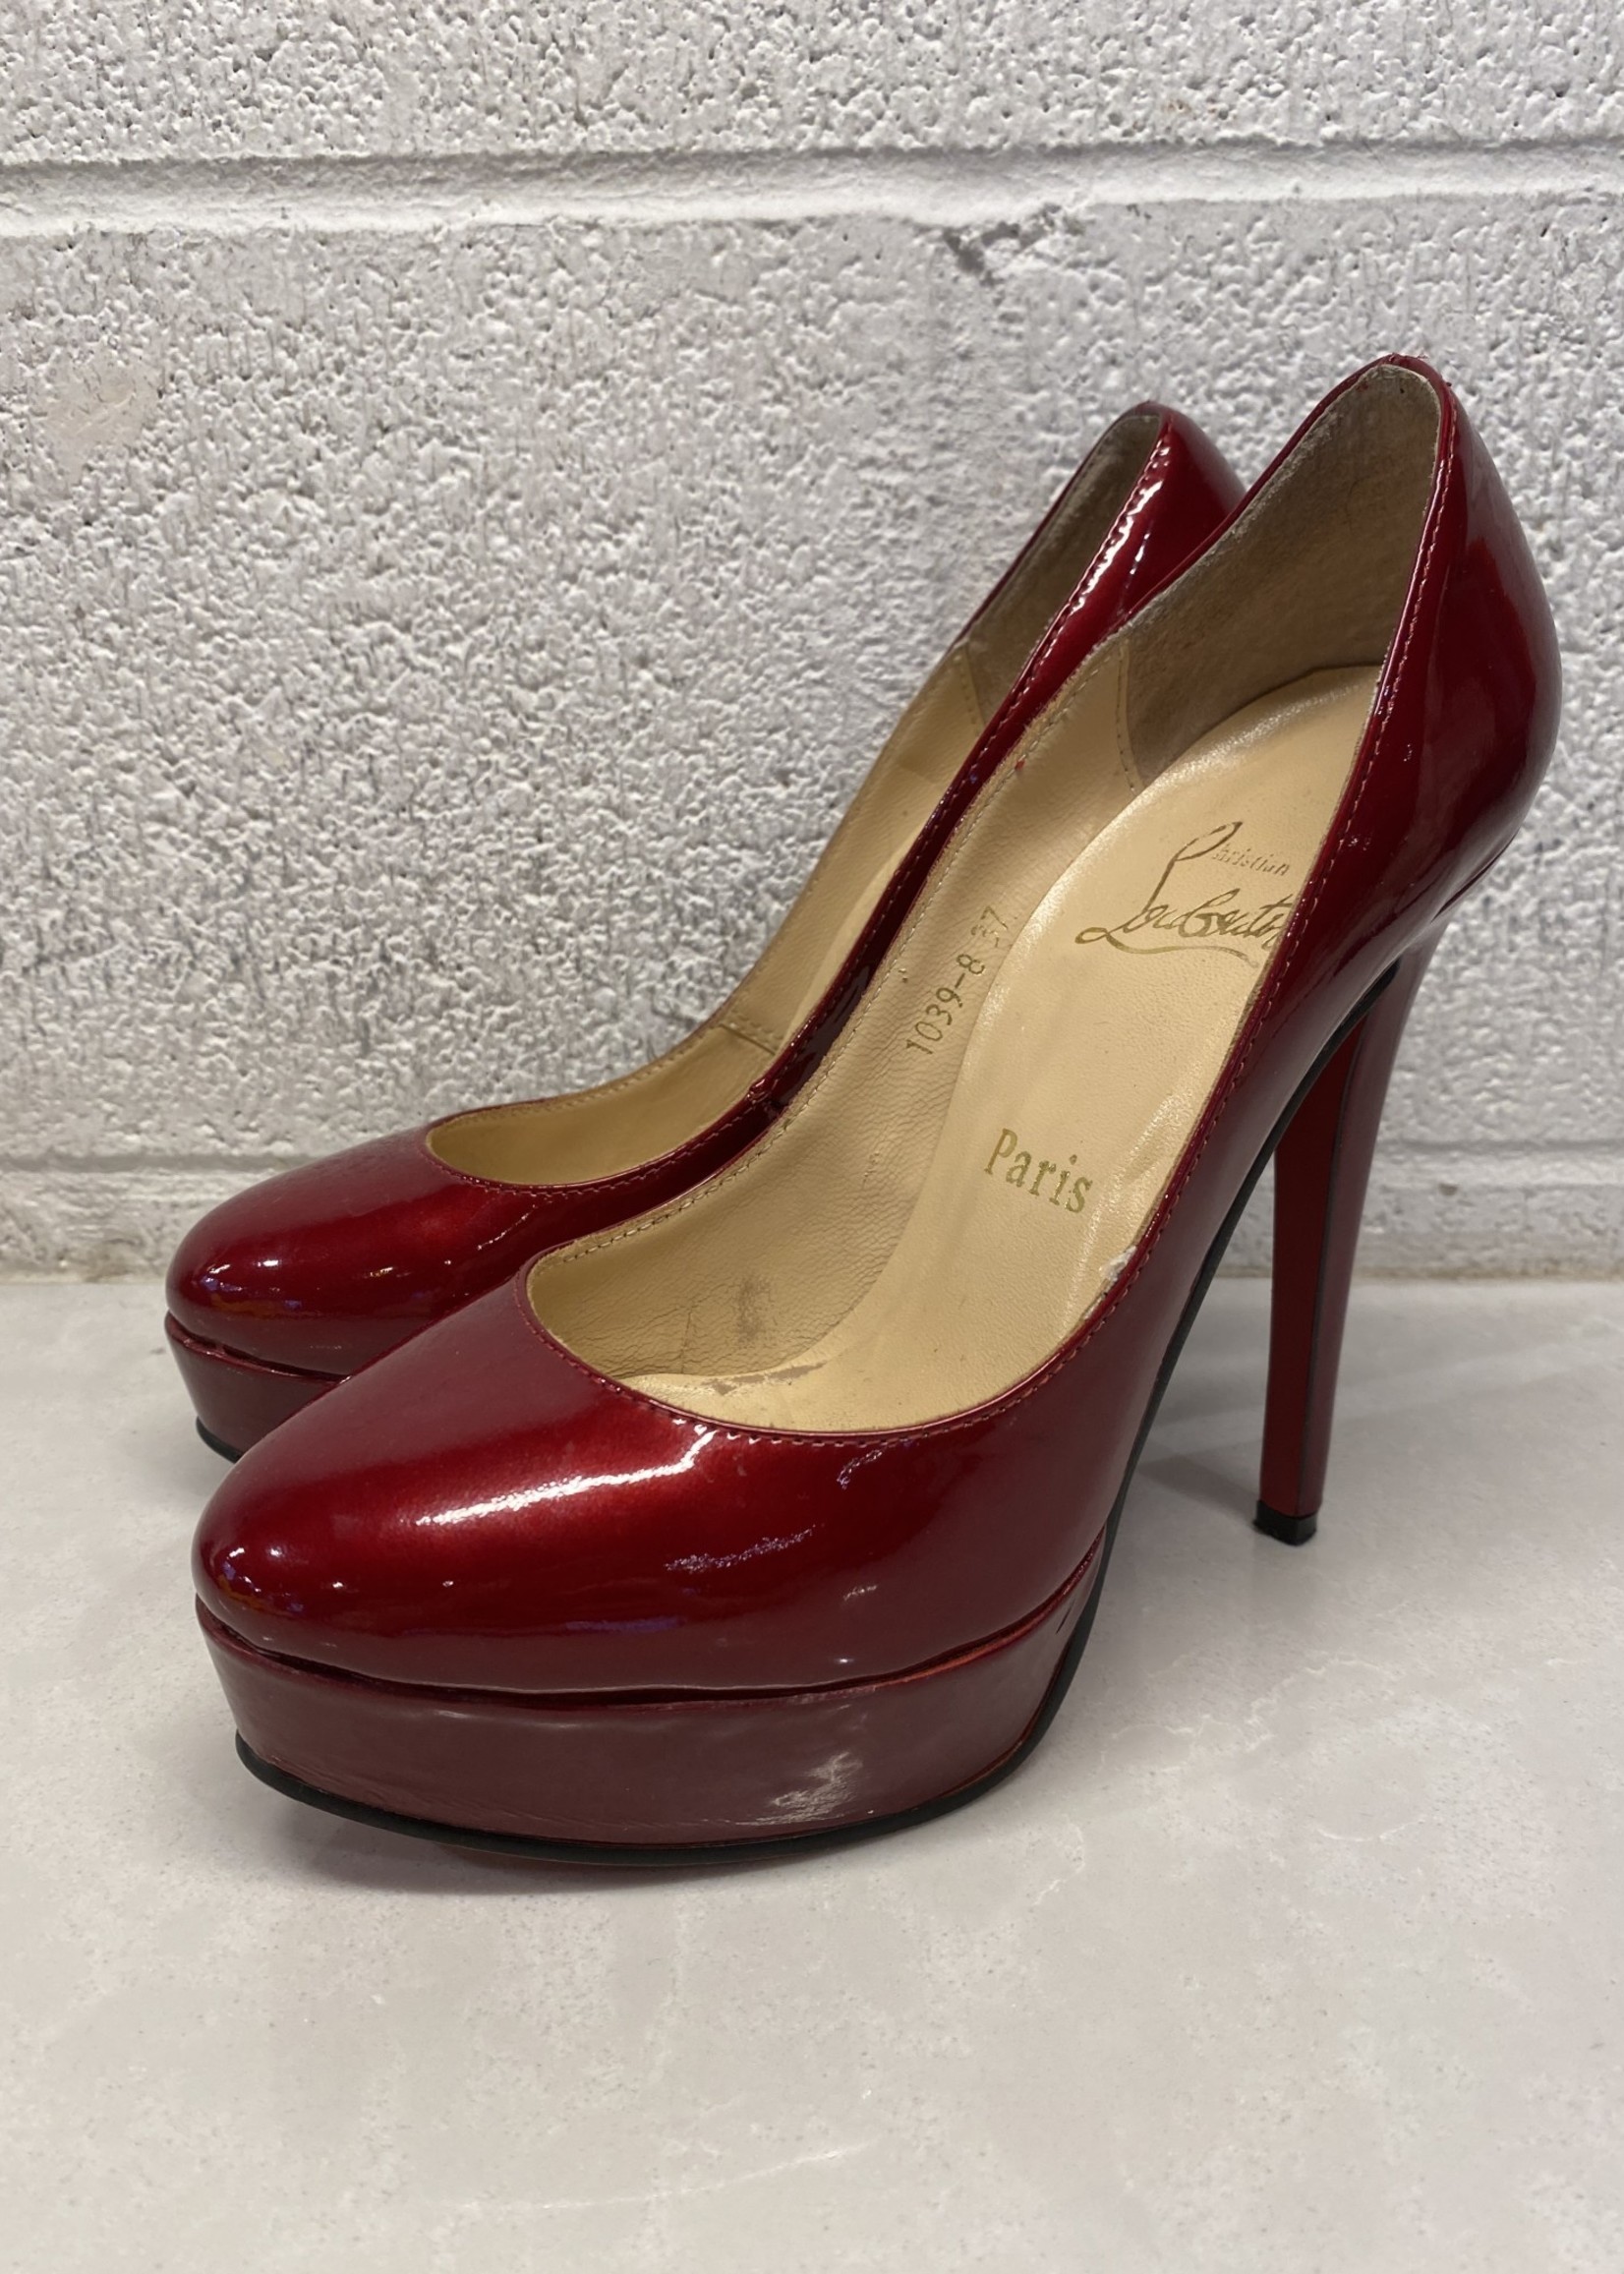 Christian Louboutin Red Patent Heels 37/6